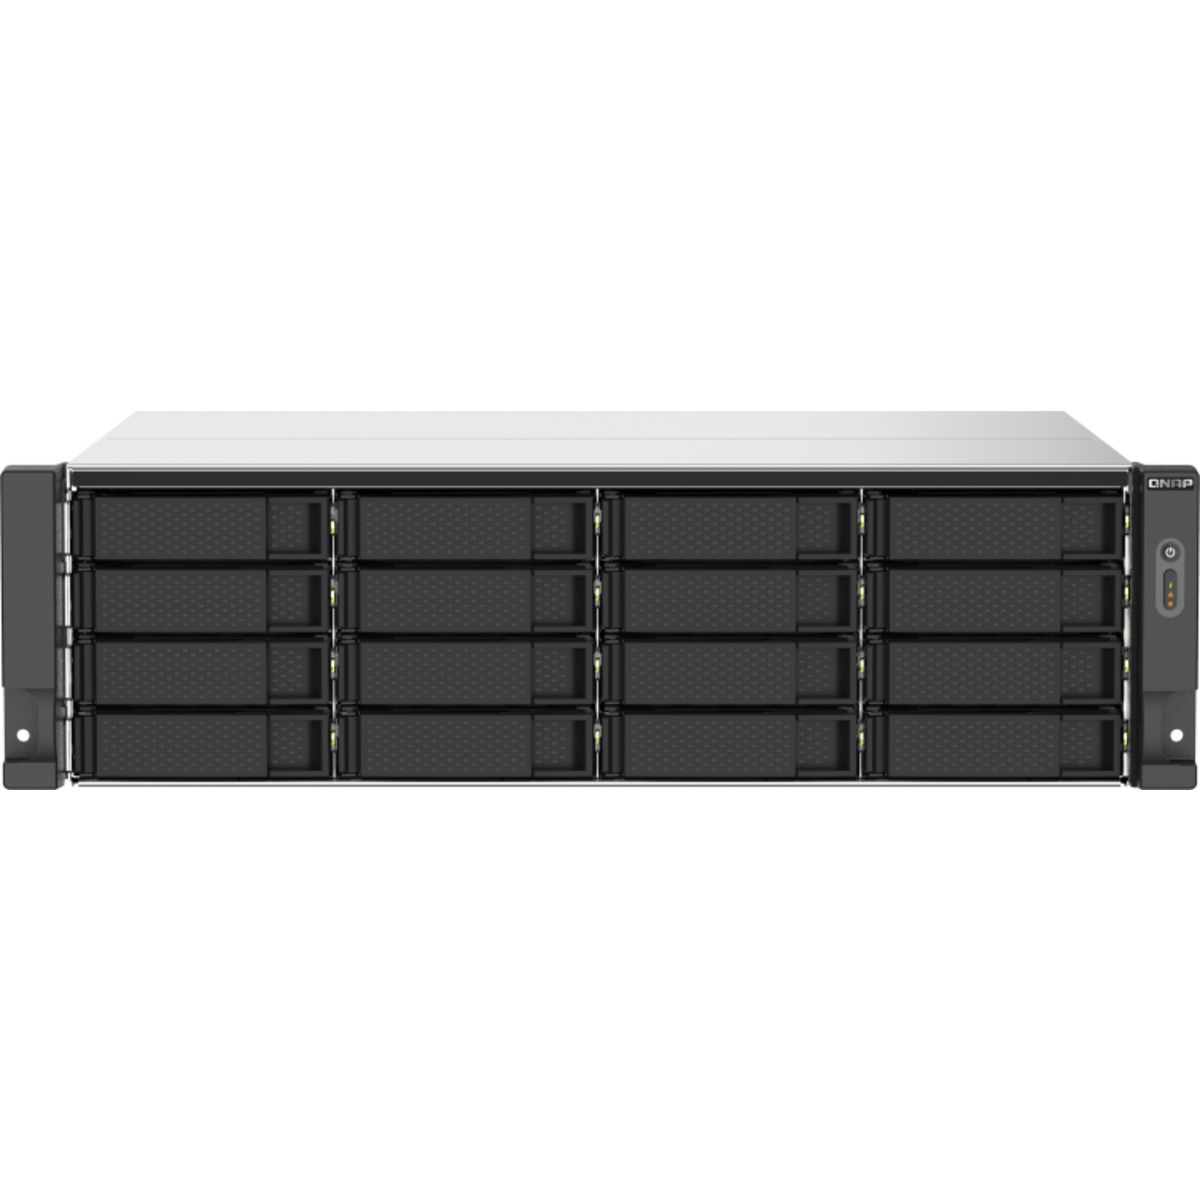 QNAP TS-1673AU-RP 96tb 16-Bay RackMount Multimedia / Power User / Business NAS - Network Attached Storage Device 16x6tb Seagate IronWolf Pro ST6000NT001 3.5 7200rpm SATA 6Gb/s HDD NAS Class Drives Installed - Burn-In Tested - FREE RAM UPGRADE TS-1673AU-RP